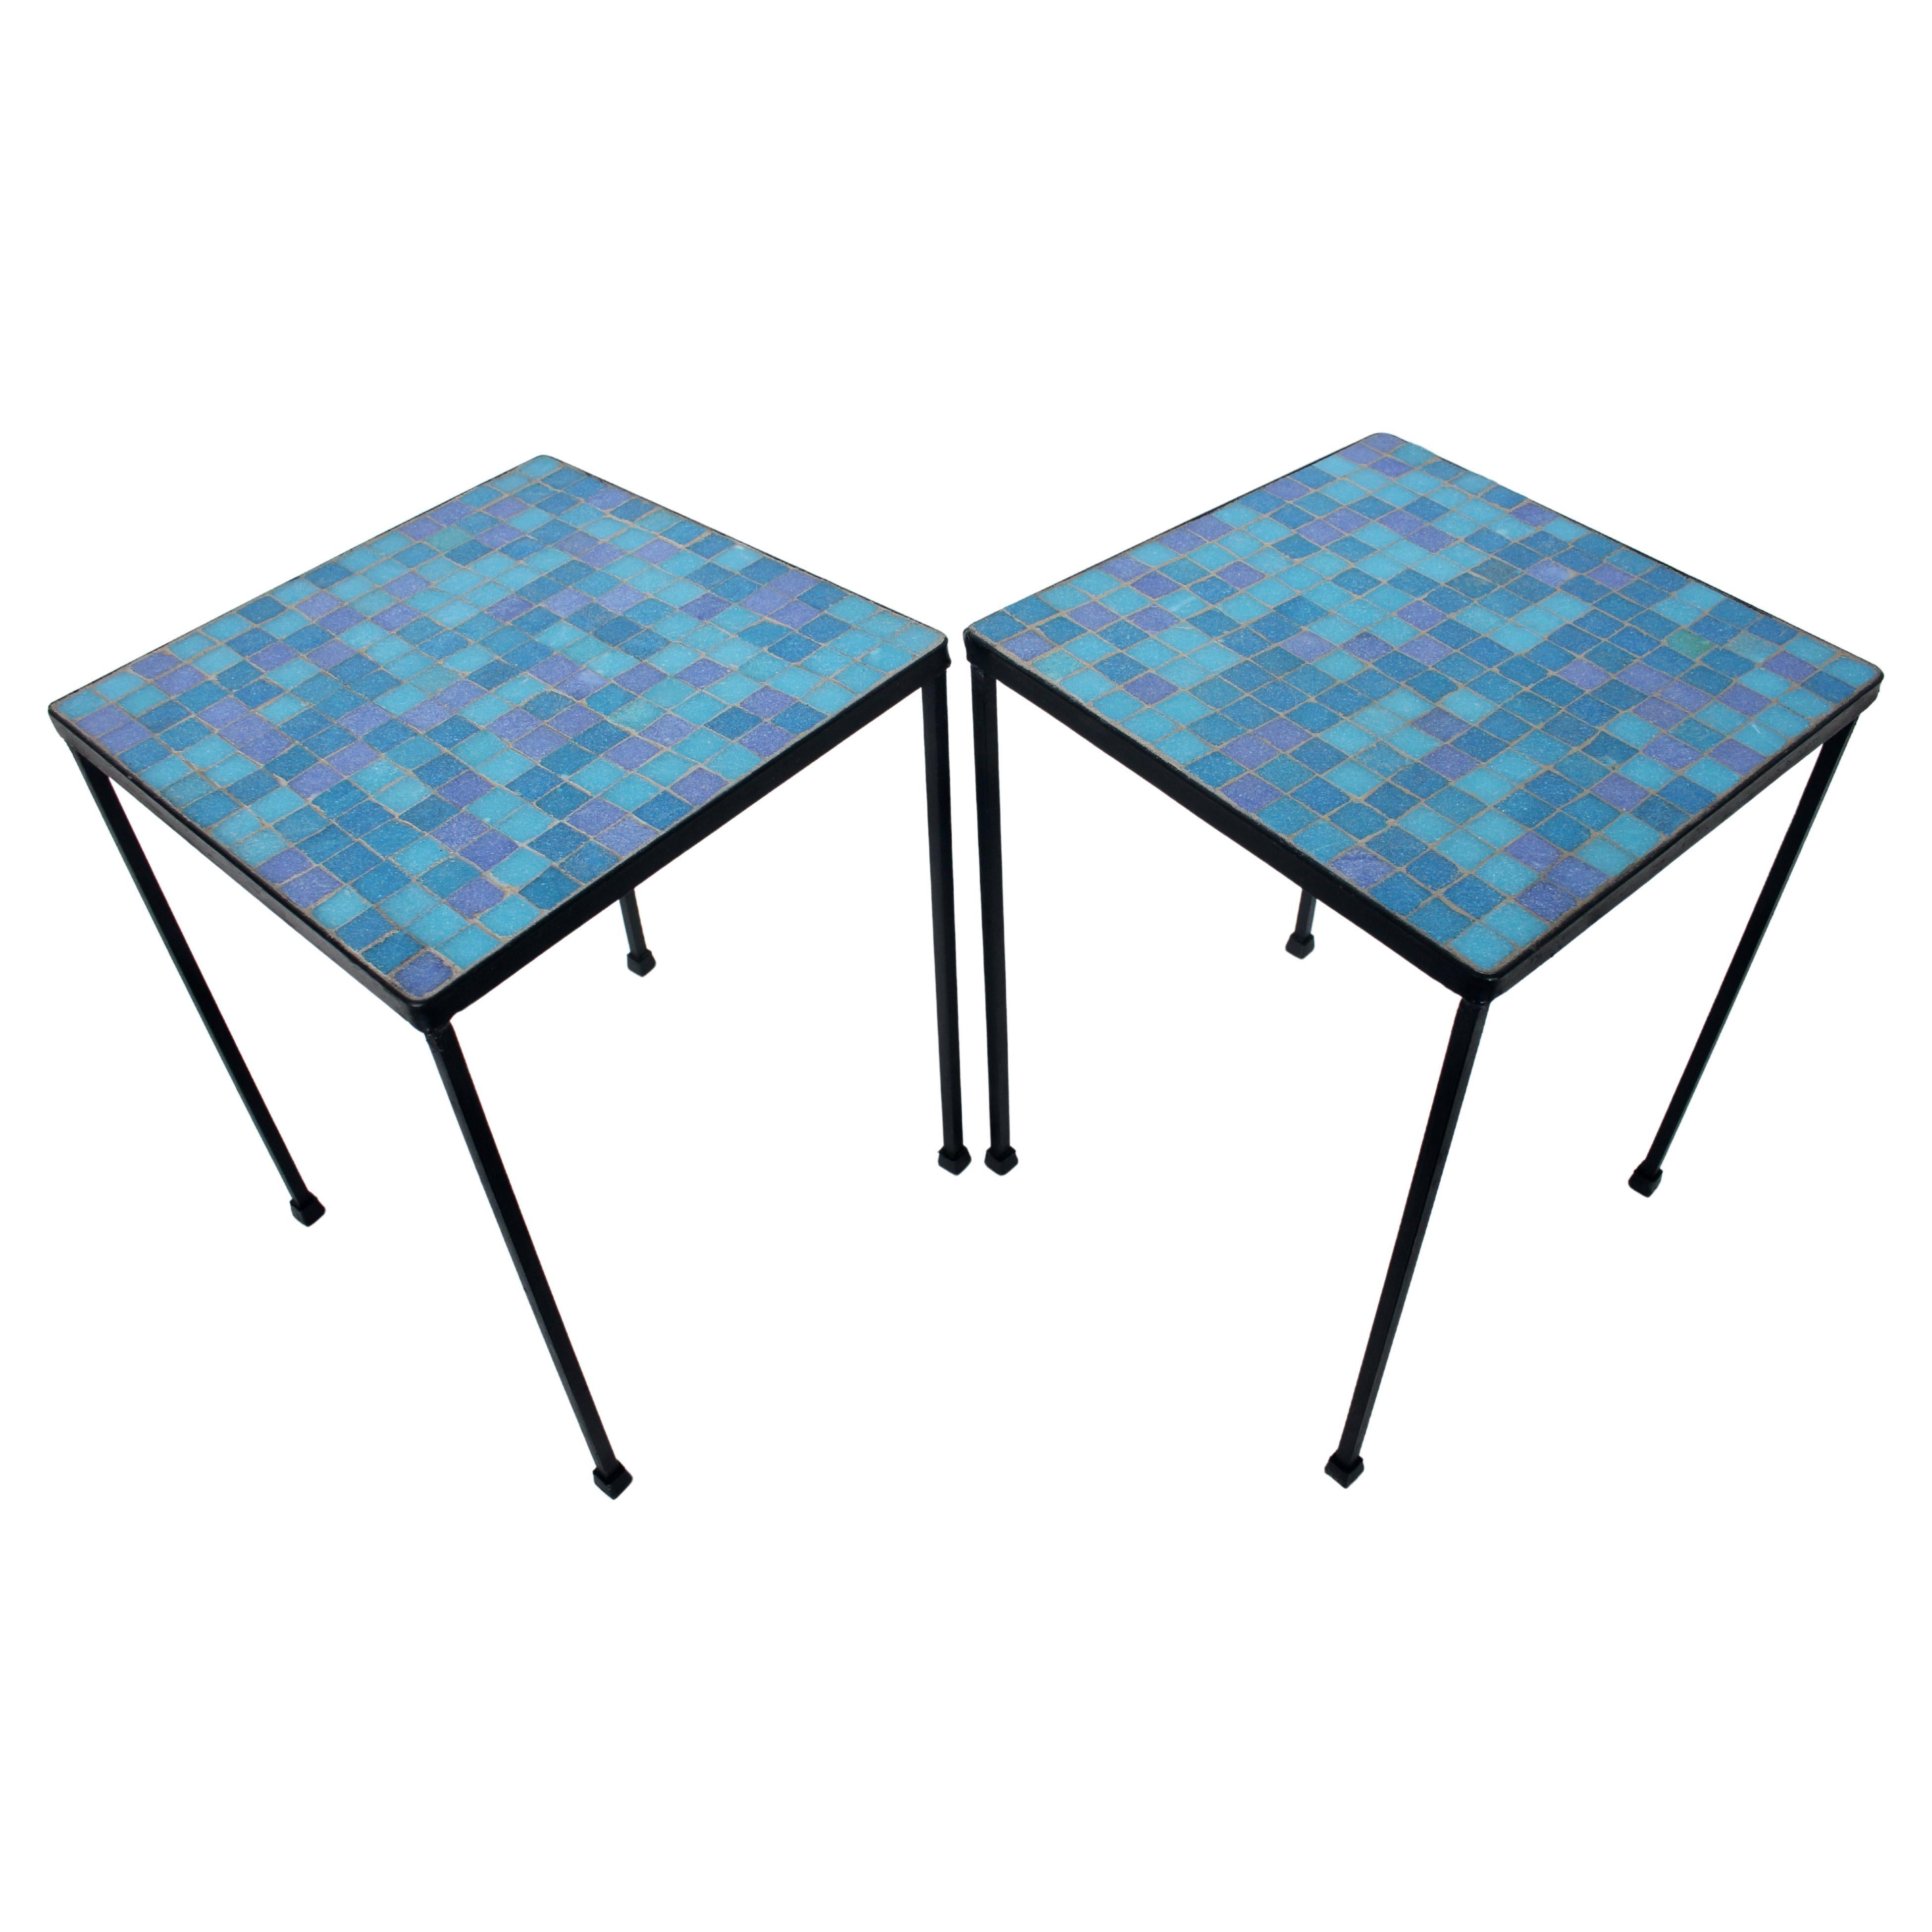 Pair of Black Wrought Iron and Blue Purple & Aqua Terrazzo Tile Tables, 1950s  For Sale 9